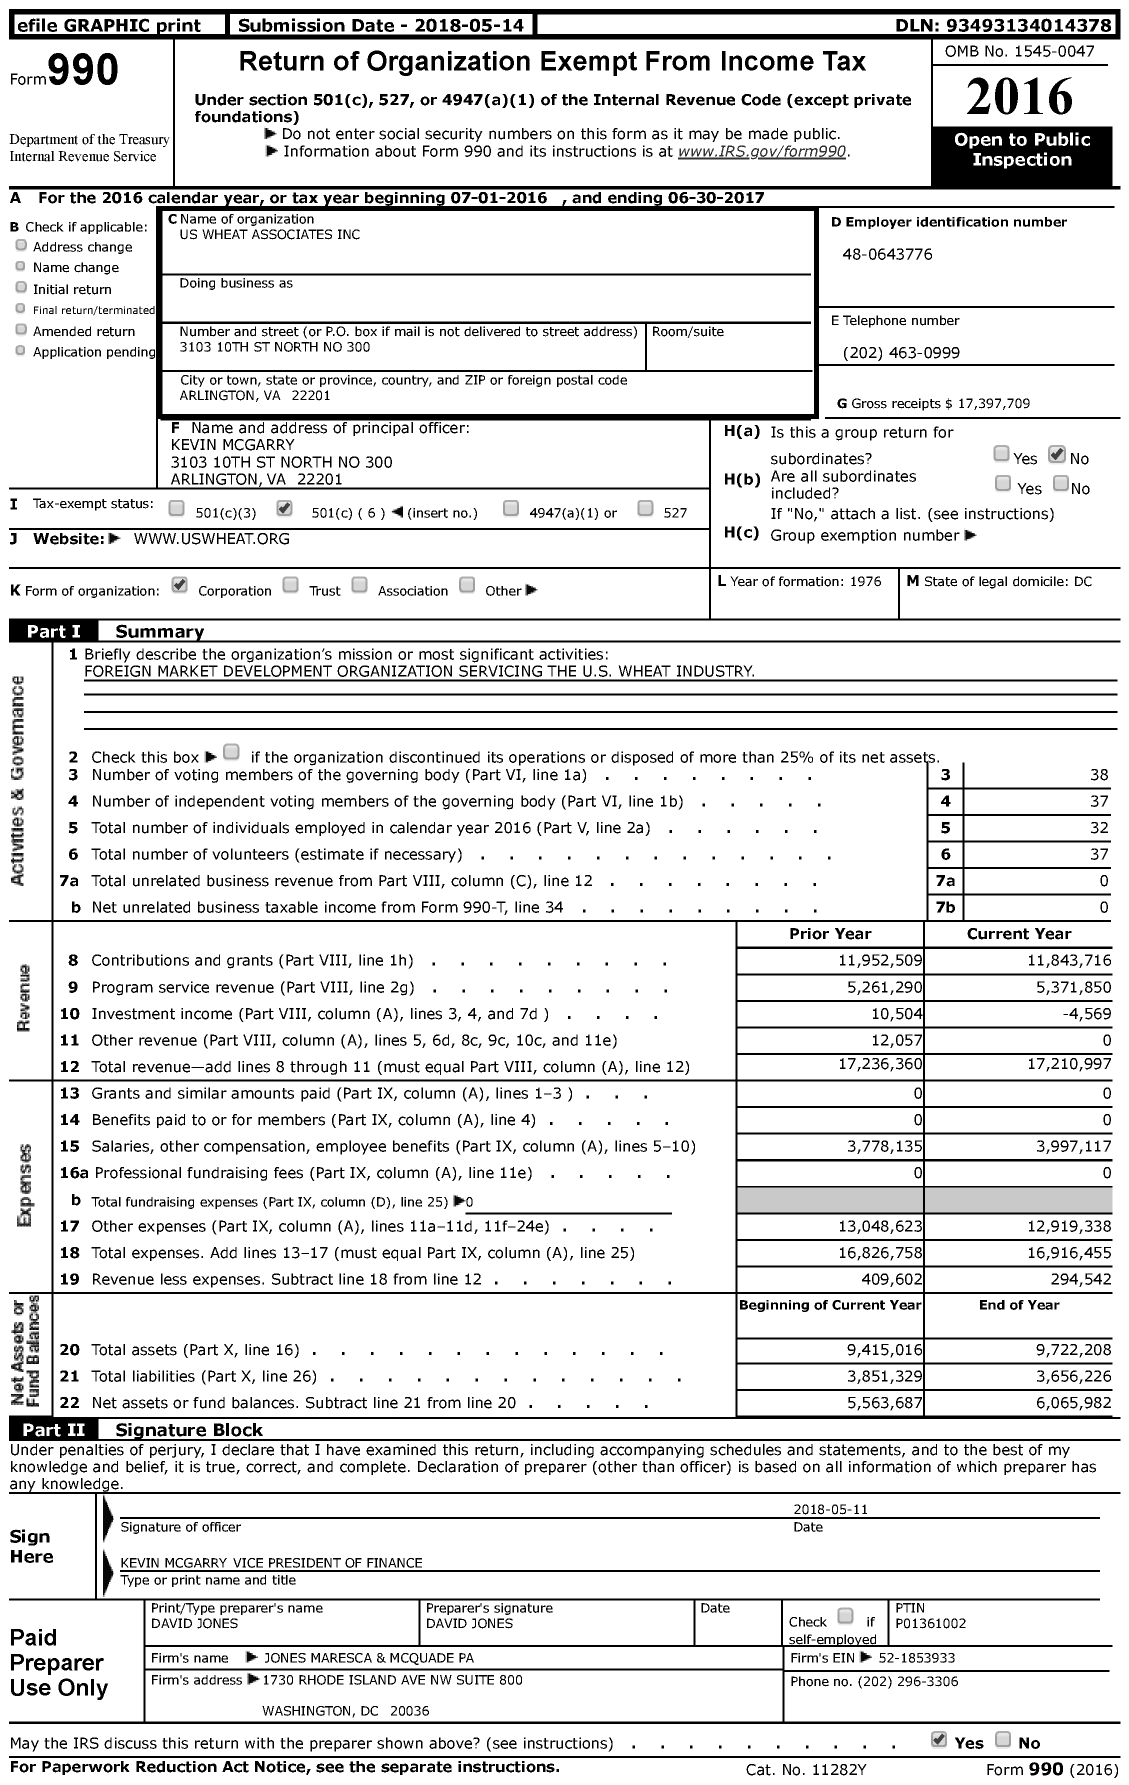 Image of first page of 2016 Form 990 for U.S. Wheat Associates (USW)